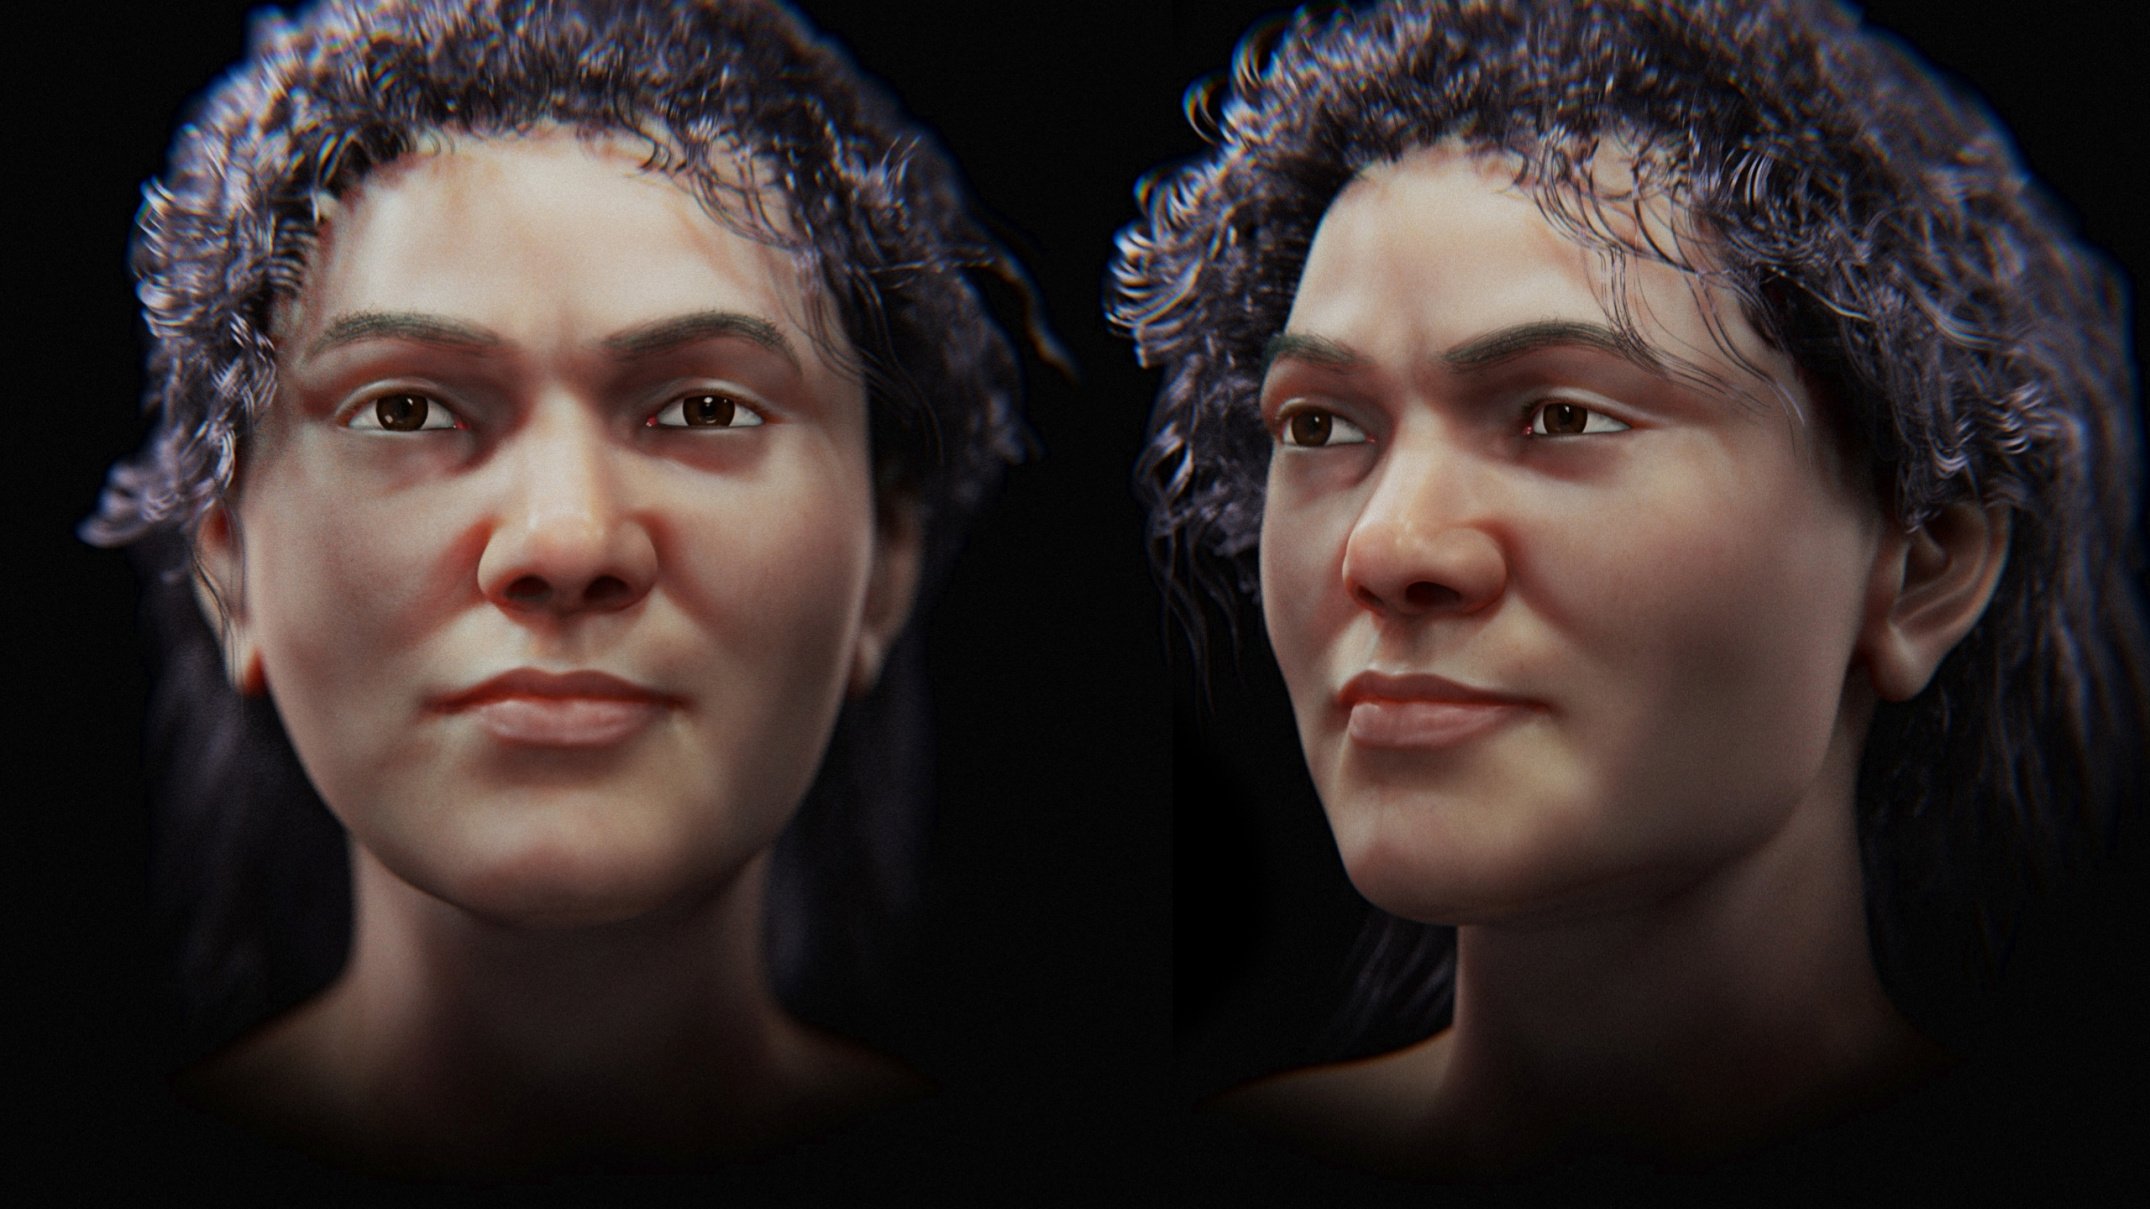 A facial approximation of the Zlatý kůň woman offers a glimpse of what she may have looked like 45,000 years ago.